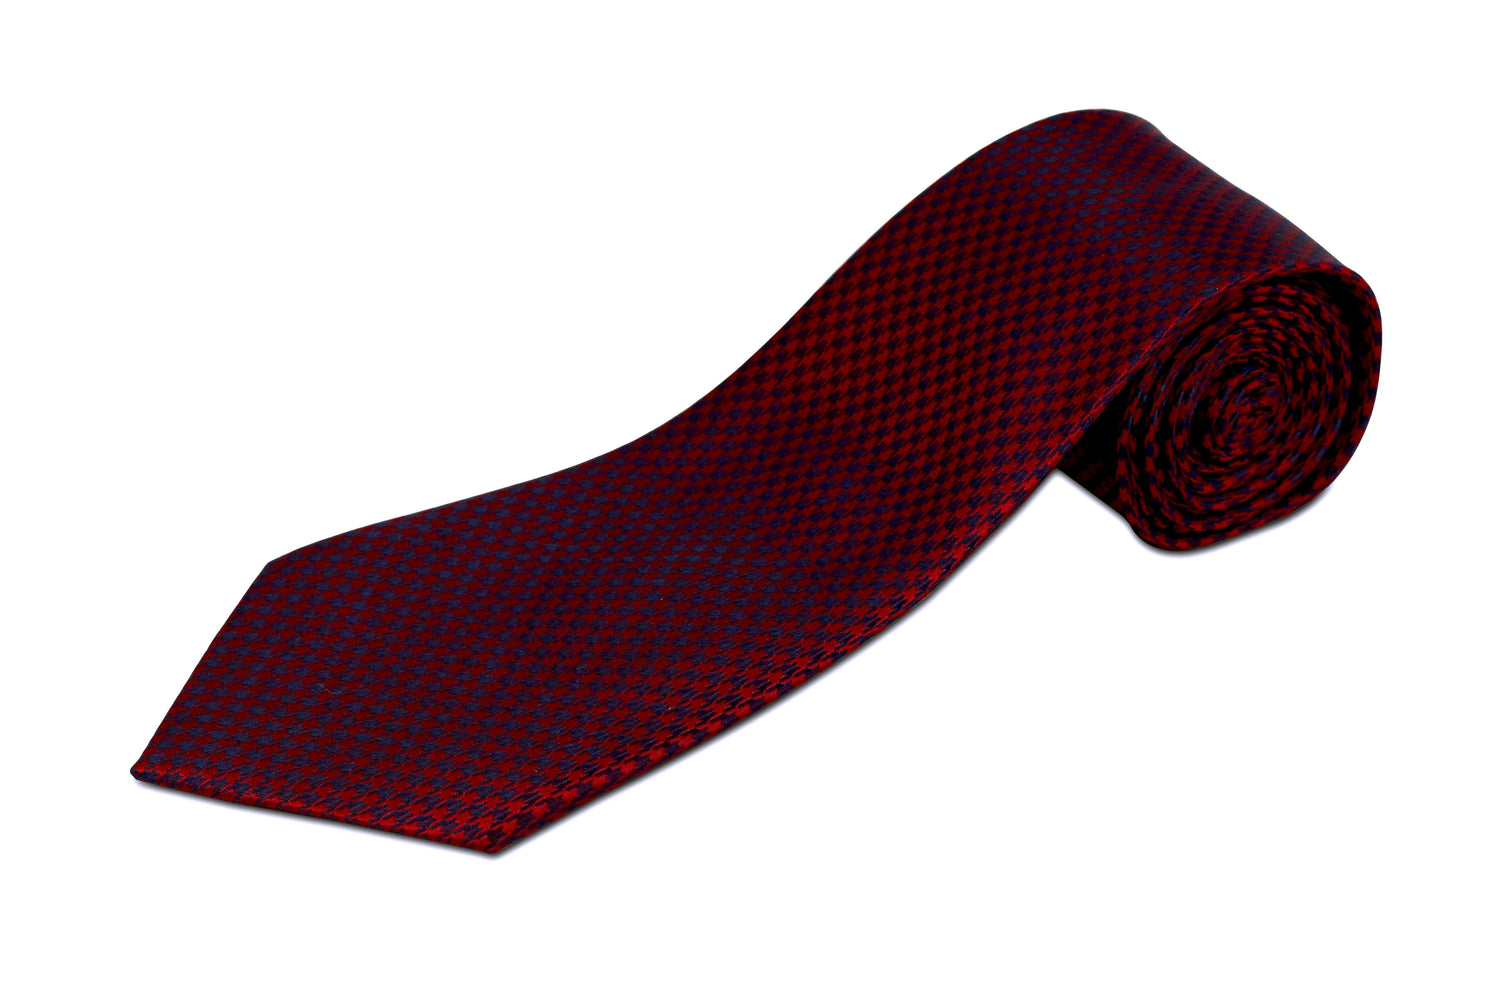 100% Silk Extra Long Tie - Houndstooth Pattern for Big and Tall Men